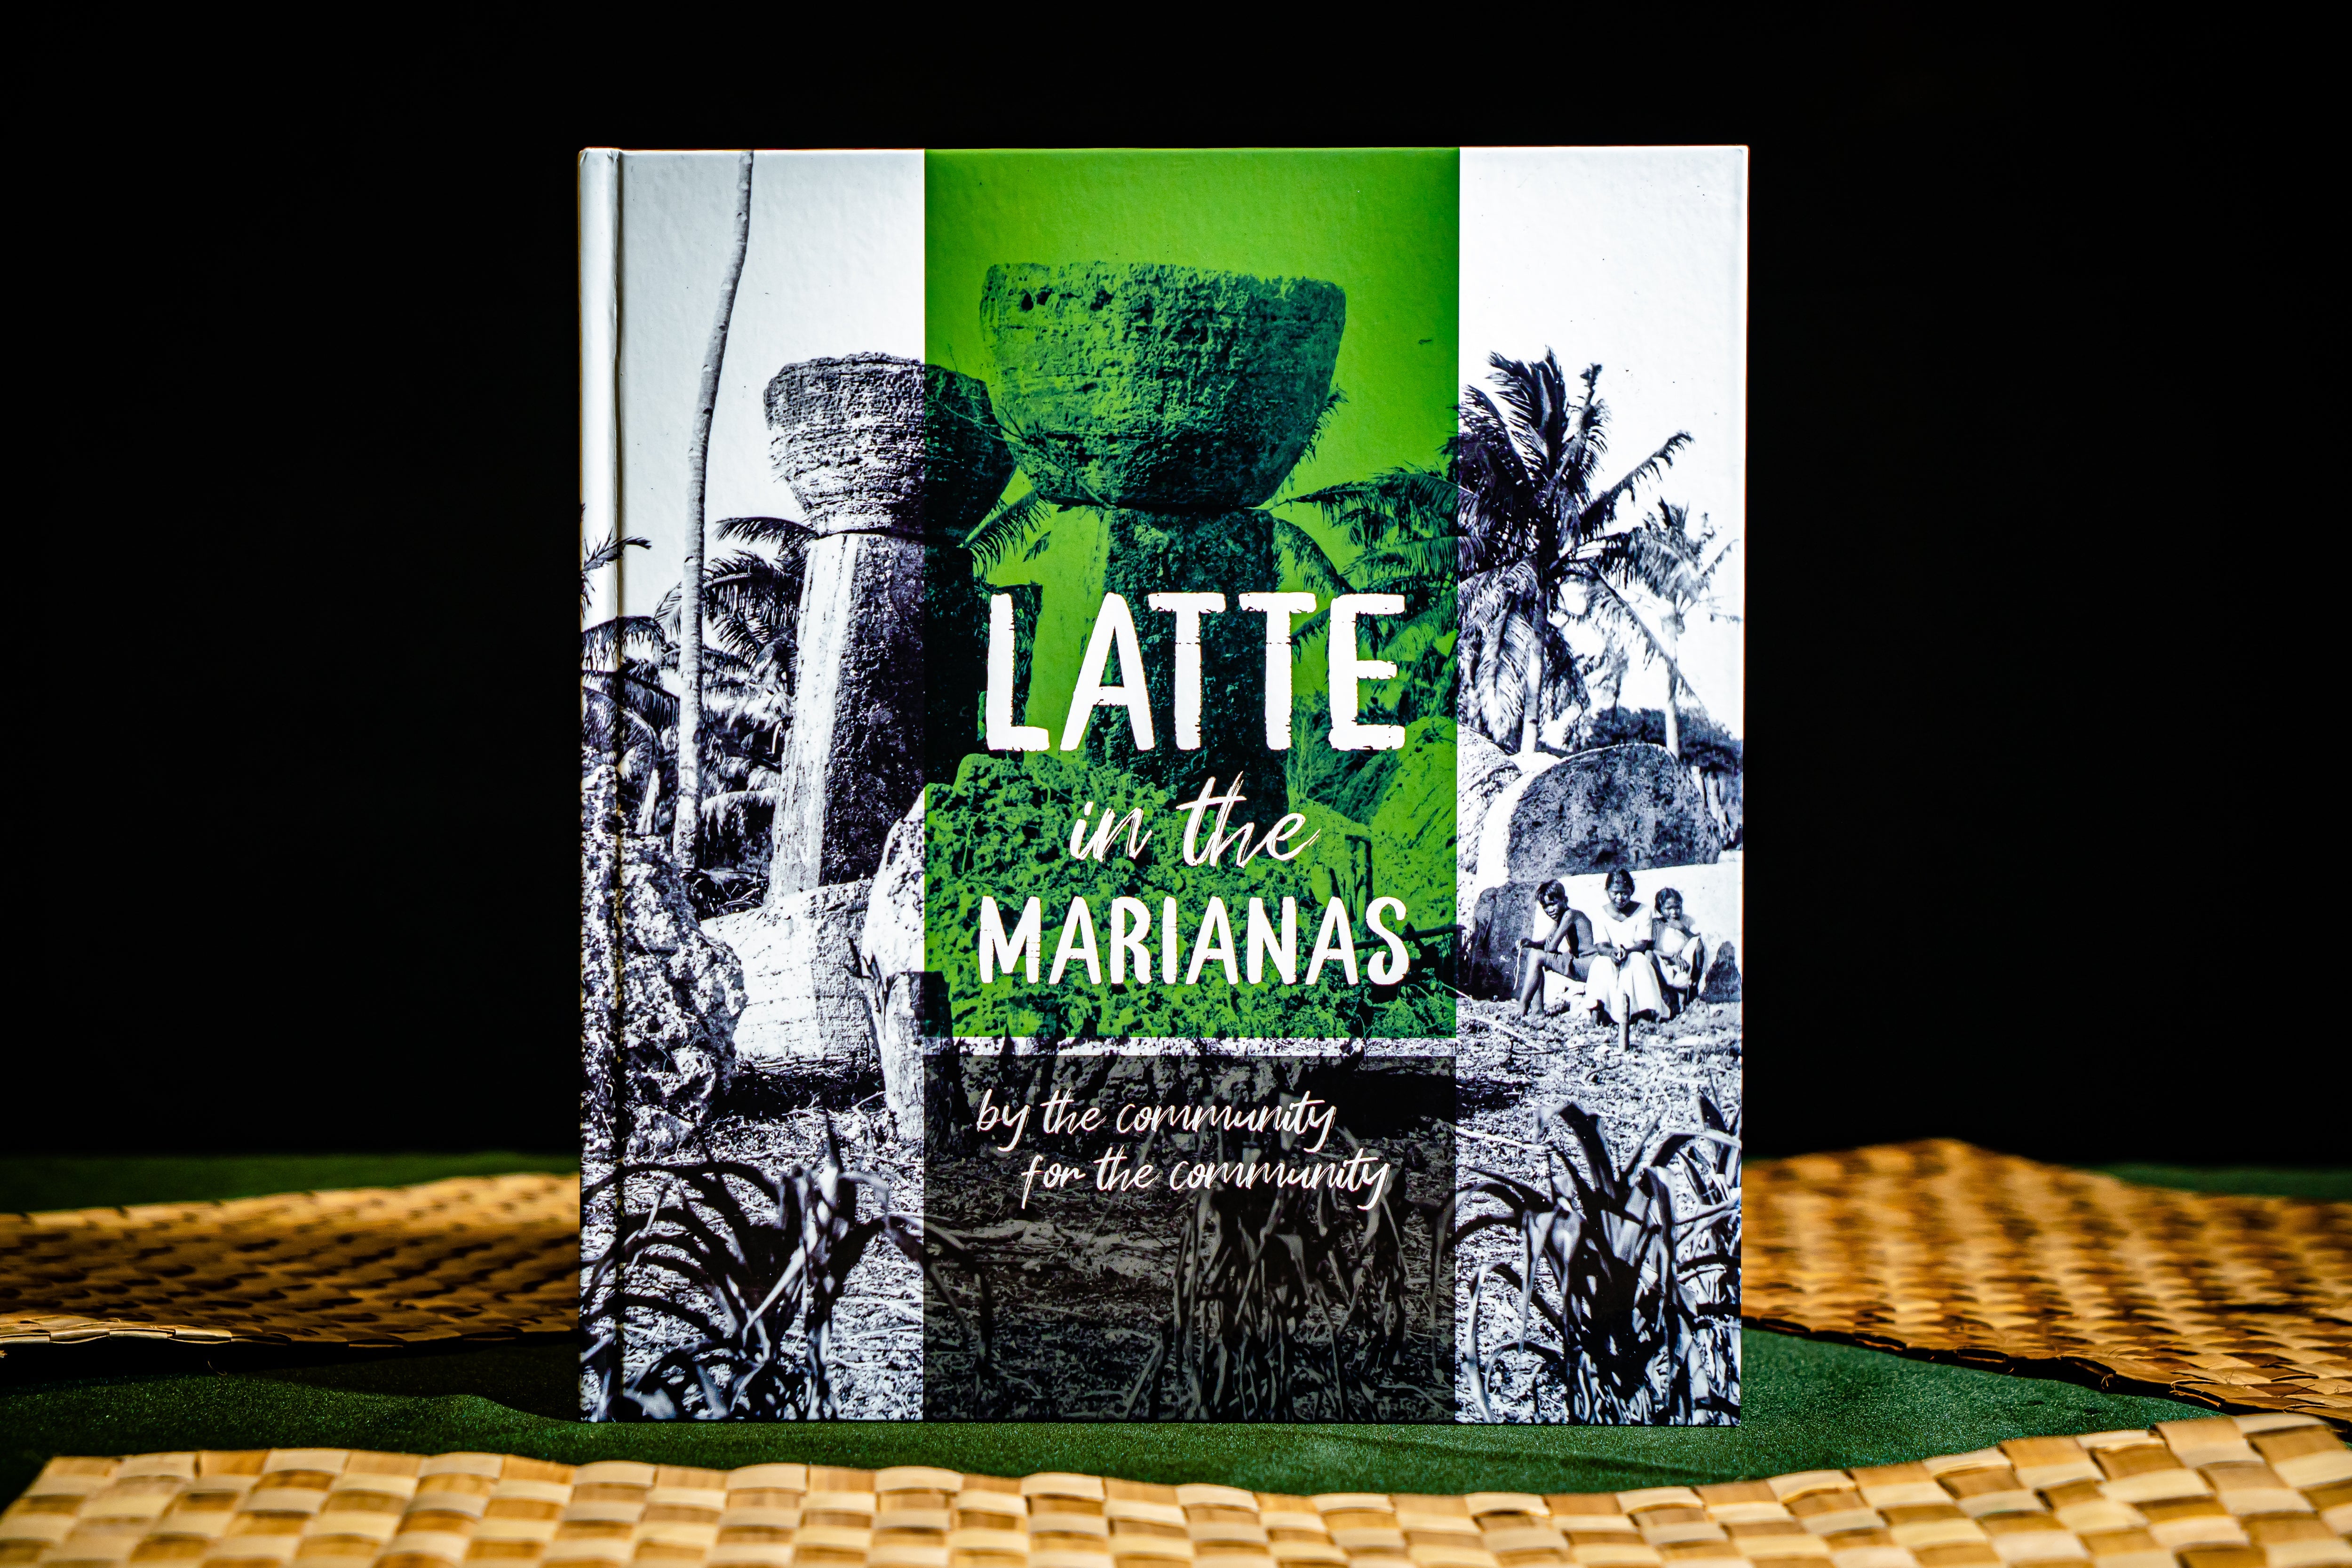 Latte in the Marianas